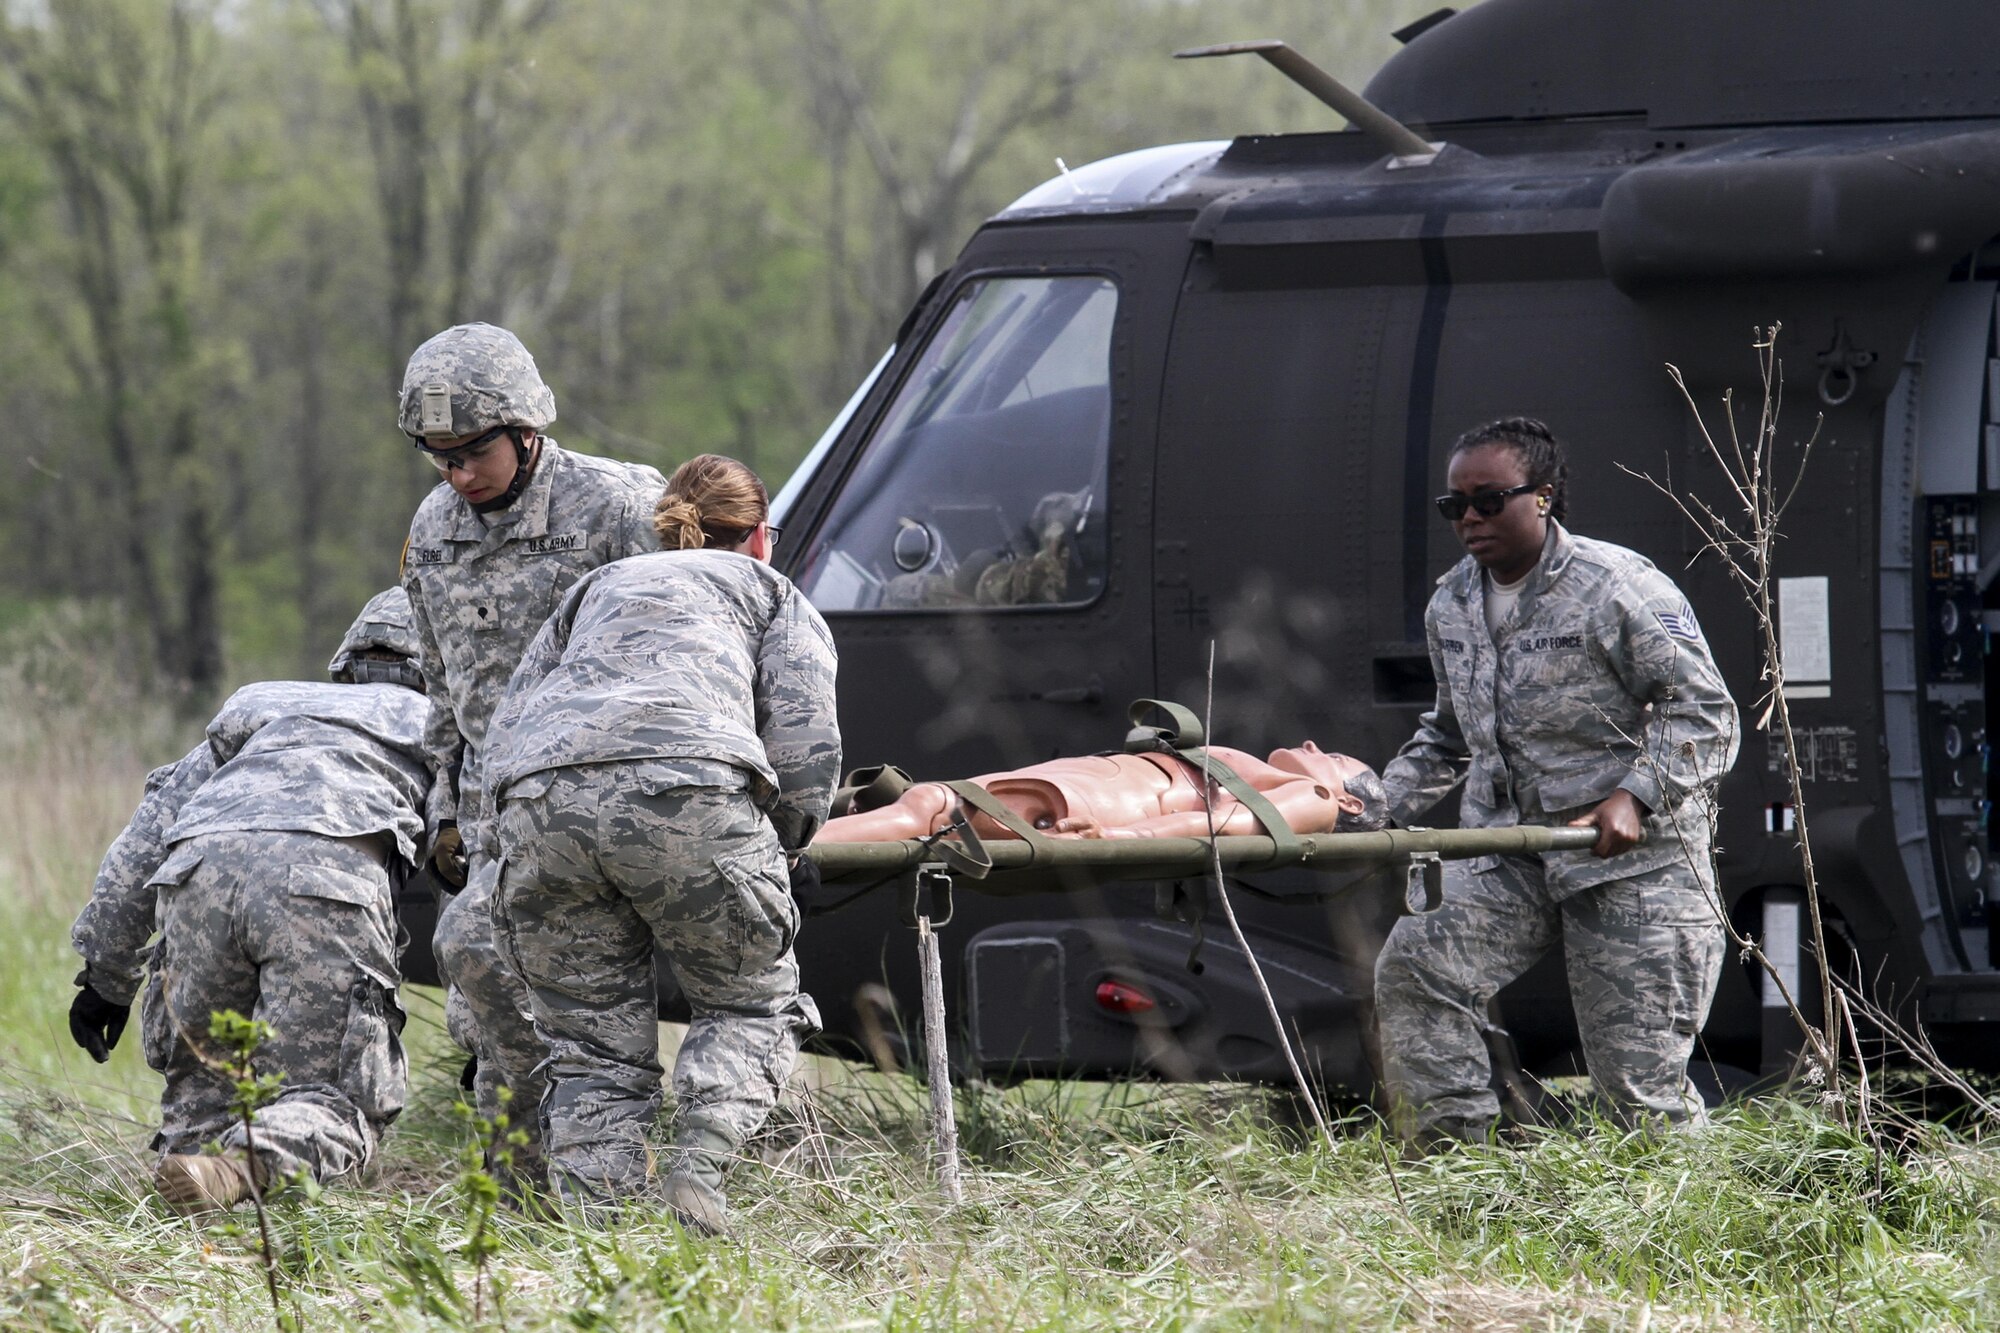 Army Reserve Spc. Ryan Flores and Spc. Bailey Jungmann of the 469th Medical Company, Wichita, Kan., team with Air Force Staff Sgt. Cherrelle Warren and Airman 1st Class Echo Heldreth of the 6th Medical Group from MacDill Air Force Base, Fla., rush to transport a mannequin patient from a UH-60 Black Hawk helicopter at Responders Support Camp Nighthawk, Ind., during Guardian Response 17, April 29, 2017. Nearly 5,000 Soldiers and Airmen from across the country participated in Guardian Response 17, a multi-component training exercise to validate the military's ability to support civil authorities in the event of a chemical, biological, radiological, and nuclear catastrophe. (U.S. Army Reserve photo by Staff Sgt. Christopher Sofia)